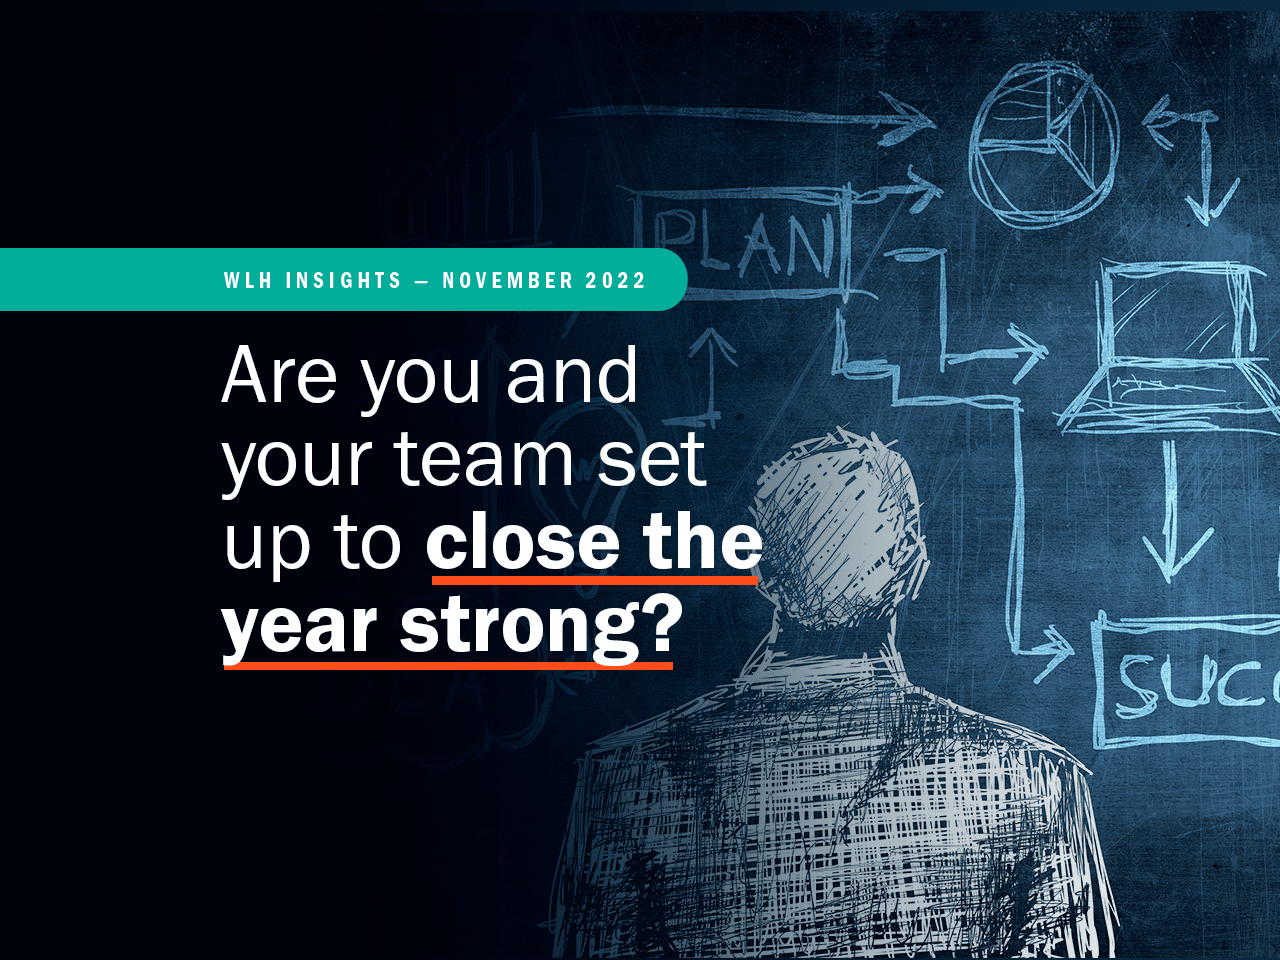 Are you and your team set up to close the year strong?